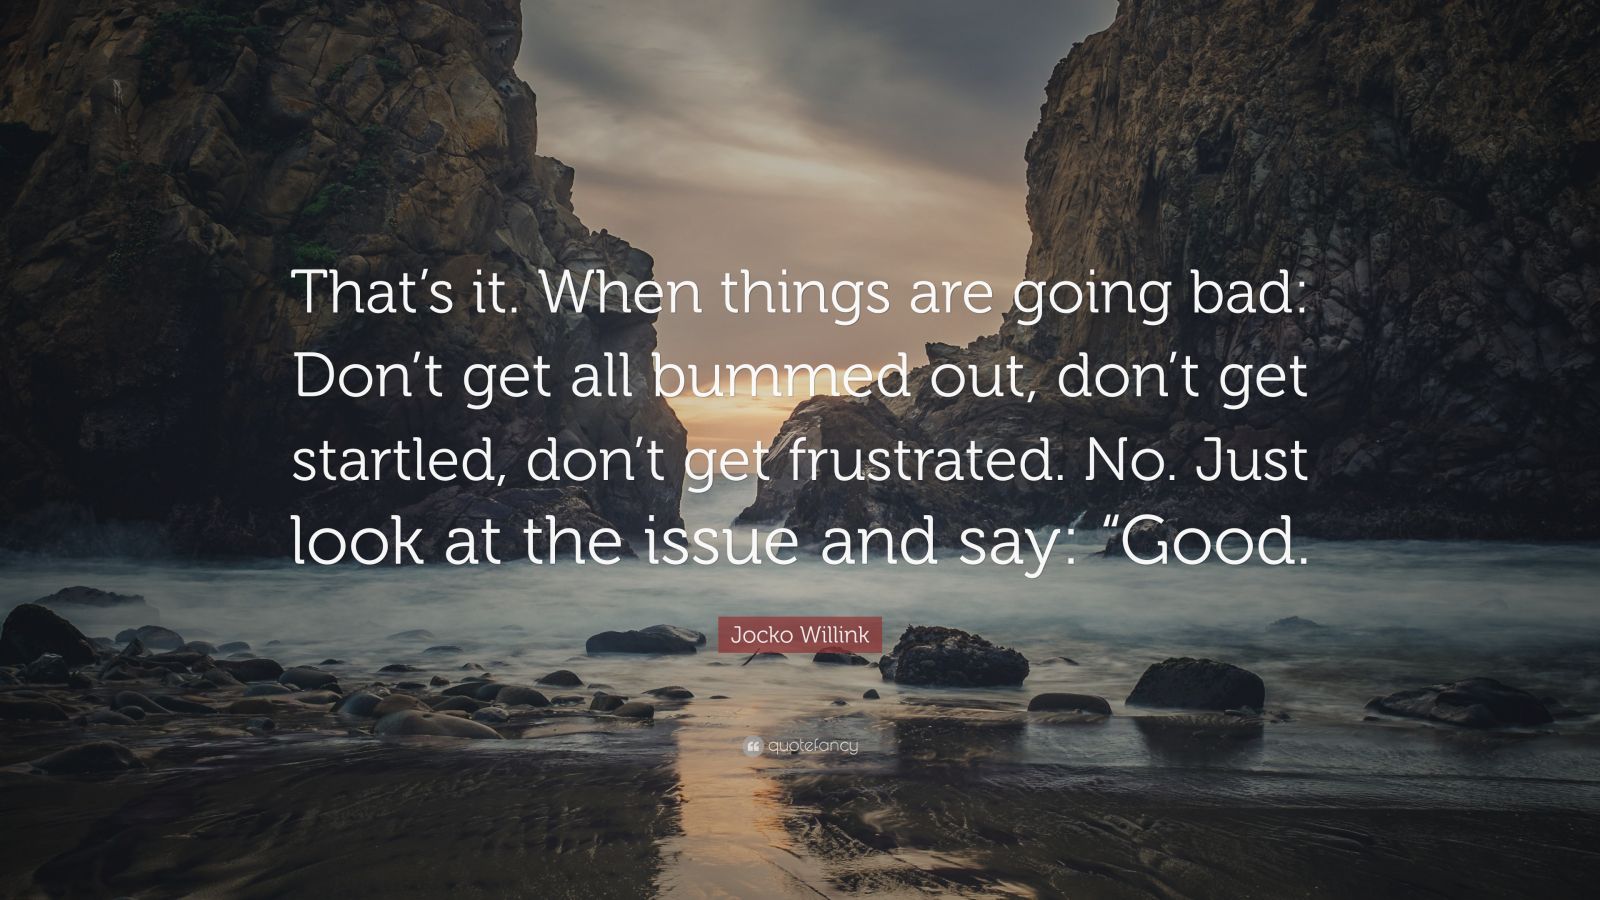 Jocko Willink Quote: “That’s It. When Things Are Going Bad: Don’t Get